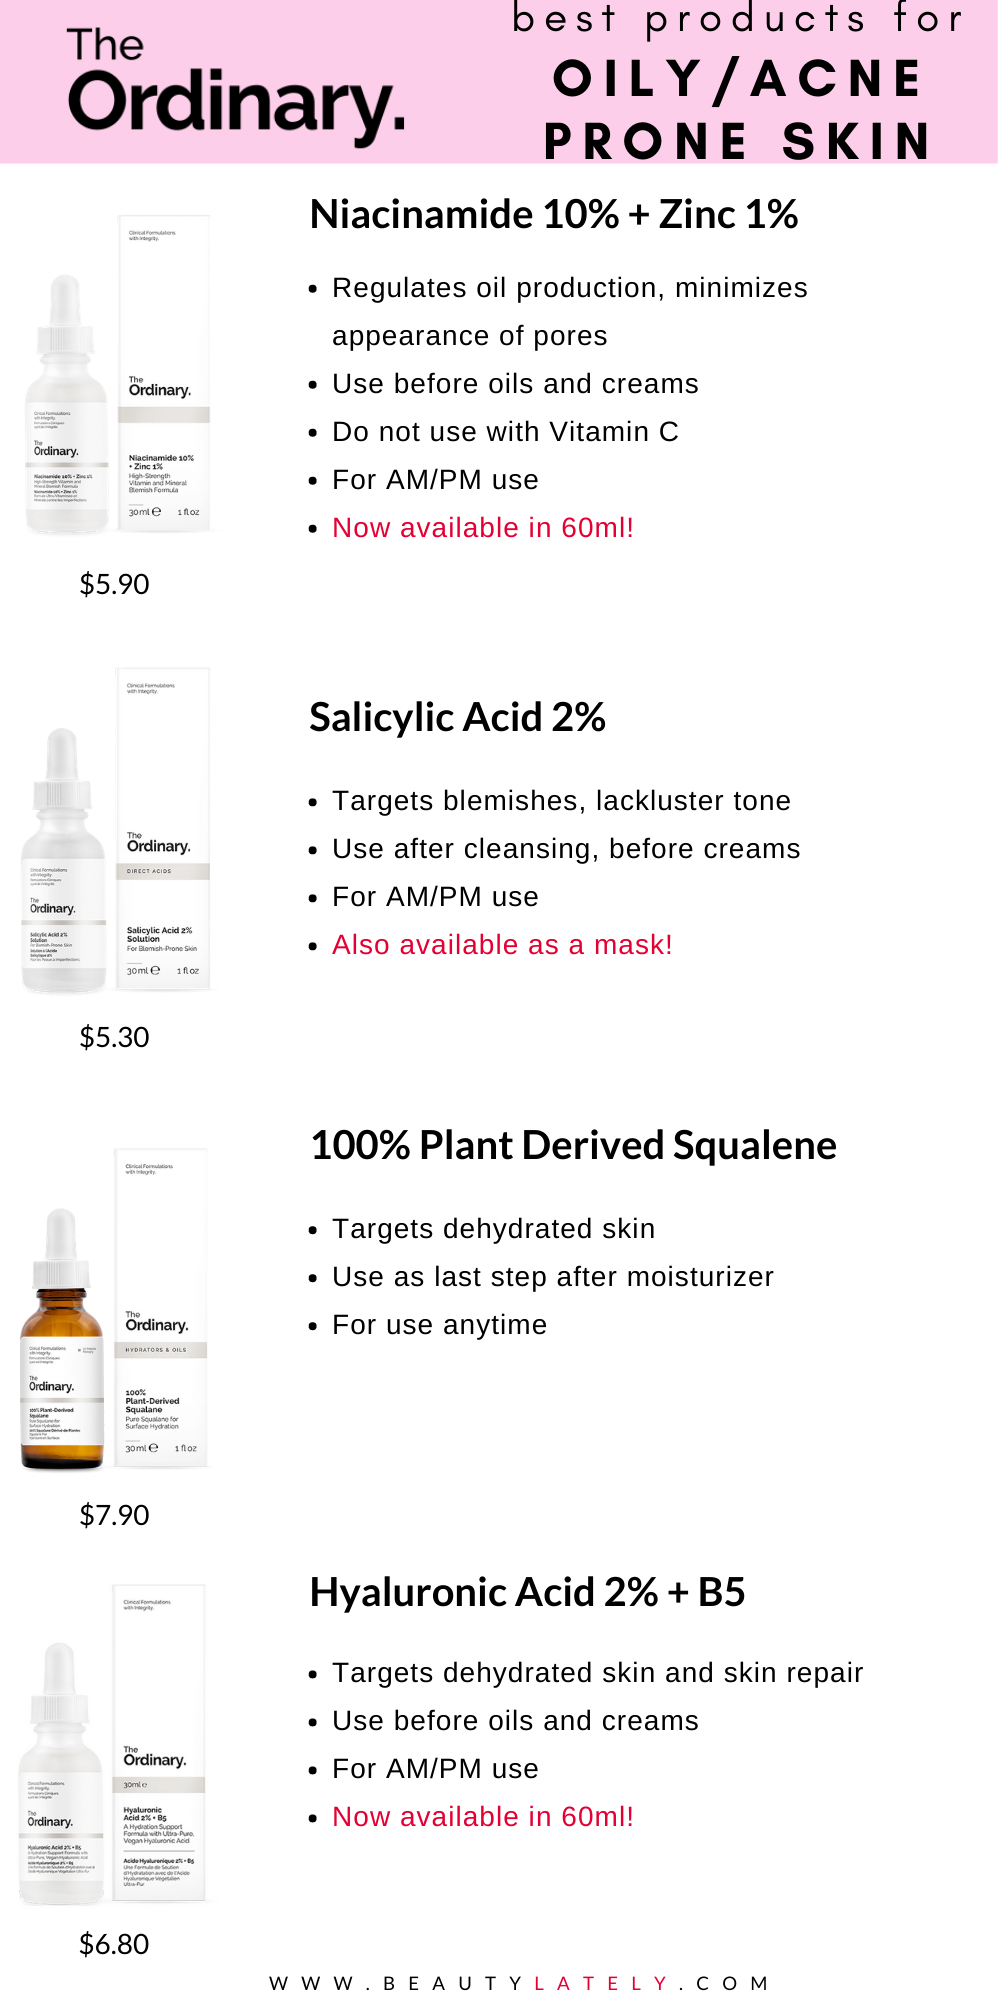 The Ordinary: Best Products for Oily and Acne Prone Skin -   19 skin care Dupes budget ideas